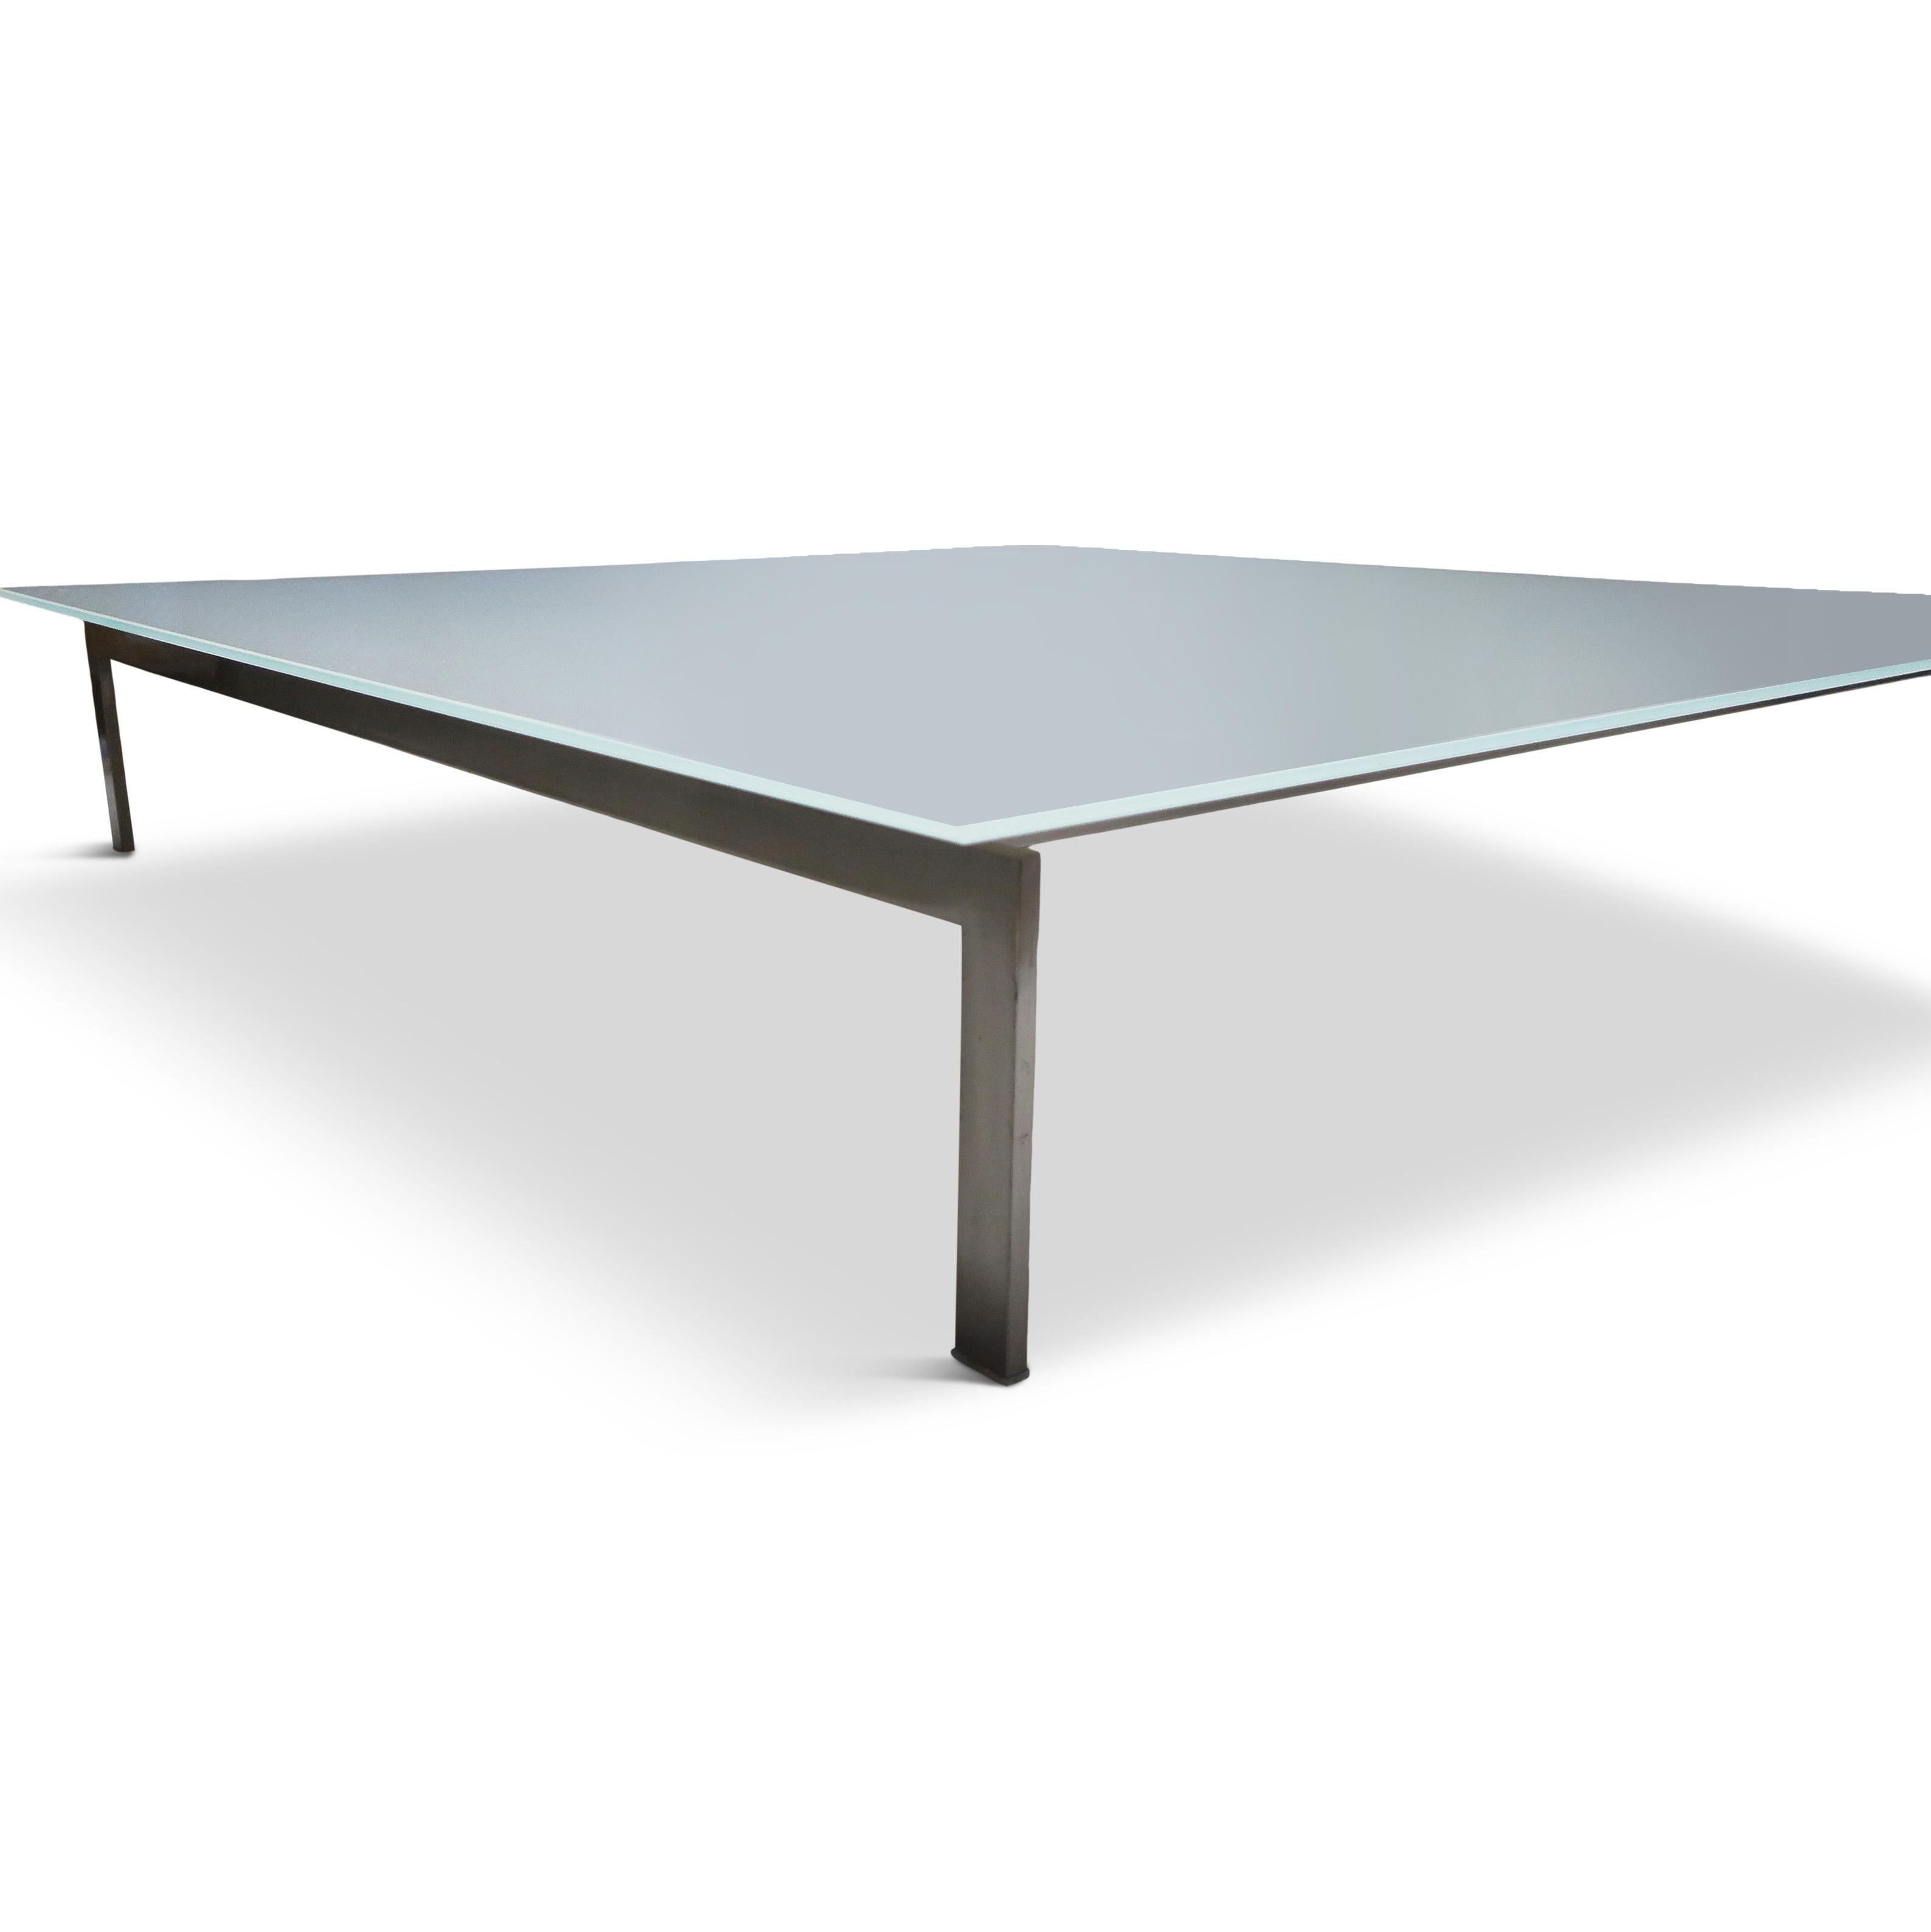 White Metro 2 Cocktail Table by Piero Lissoni for Living Divani In Good Condition For Sale In Brooklyn, NY